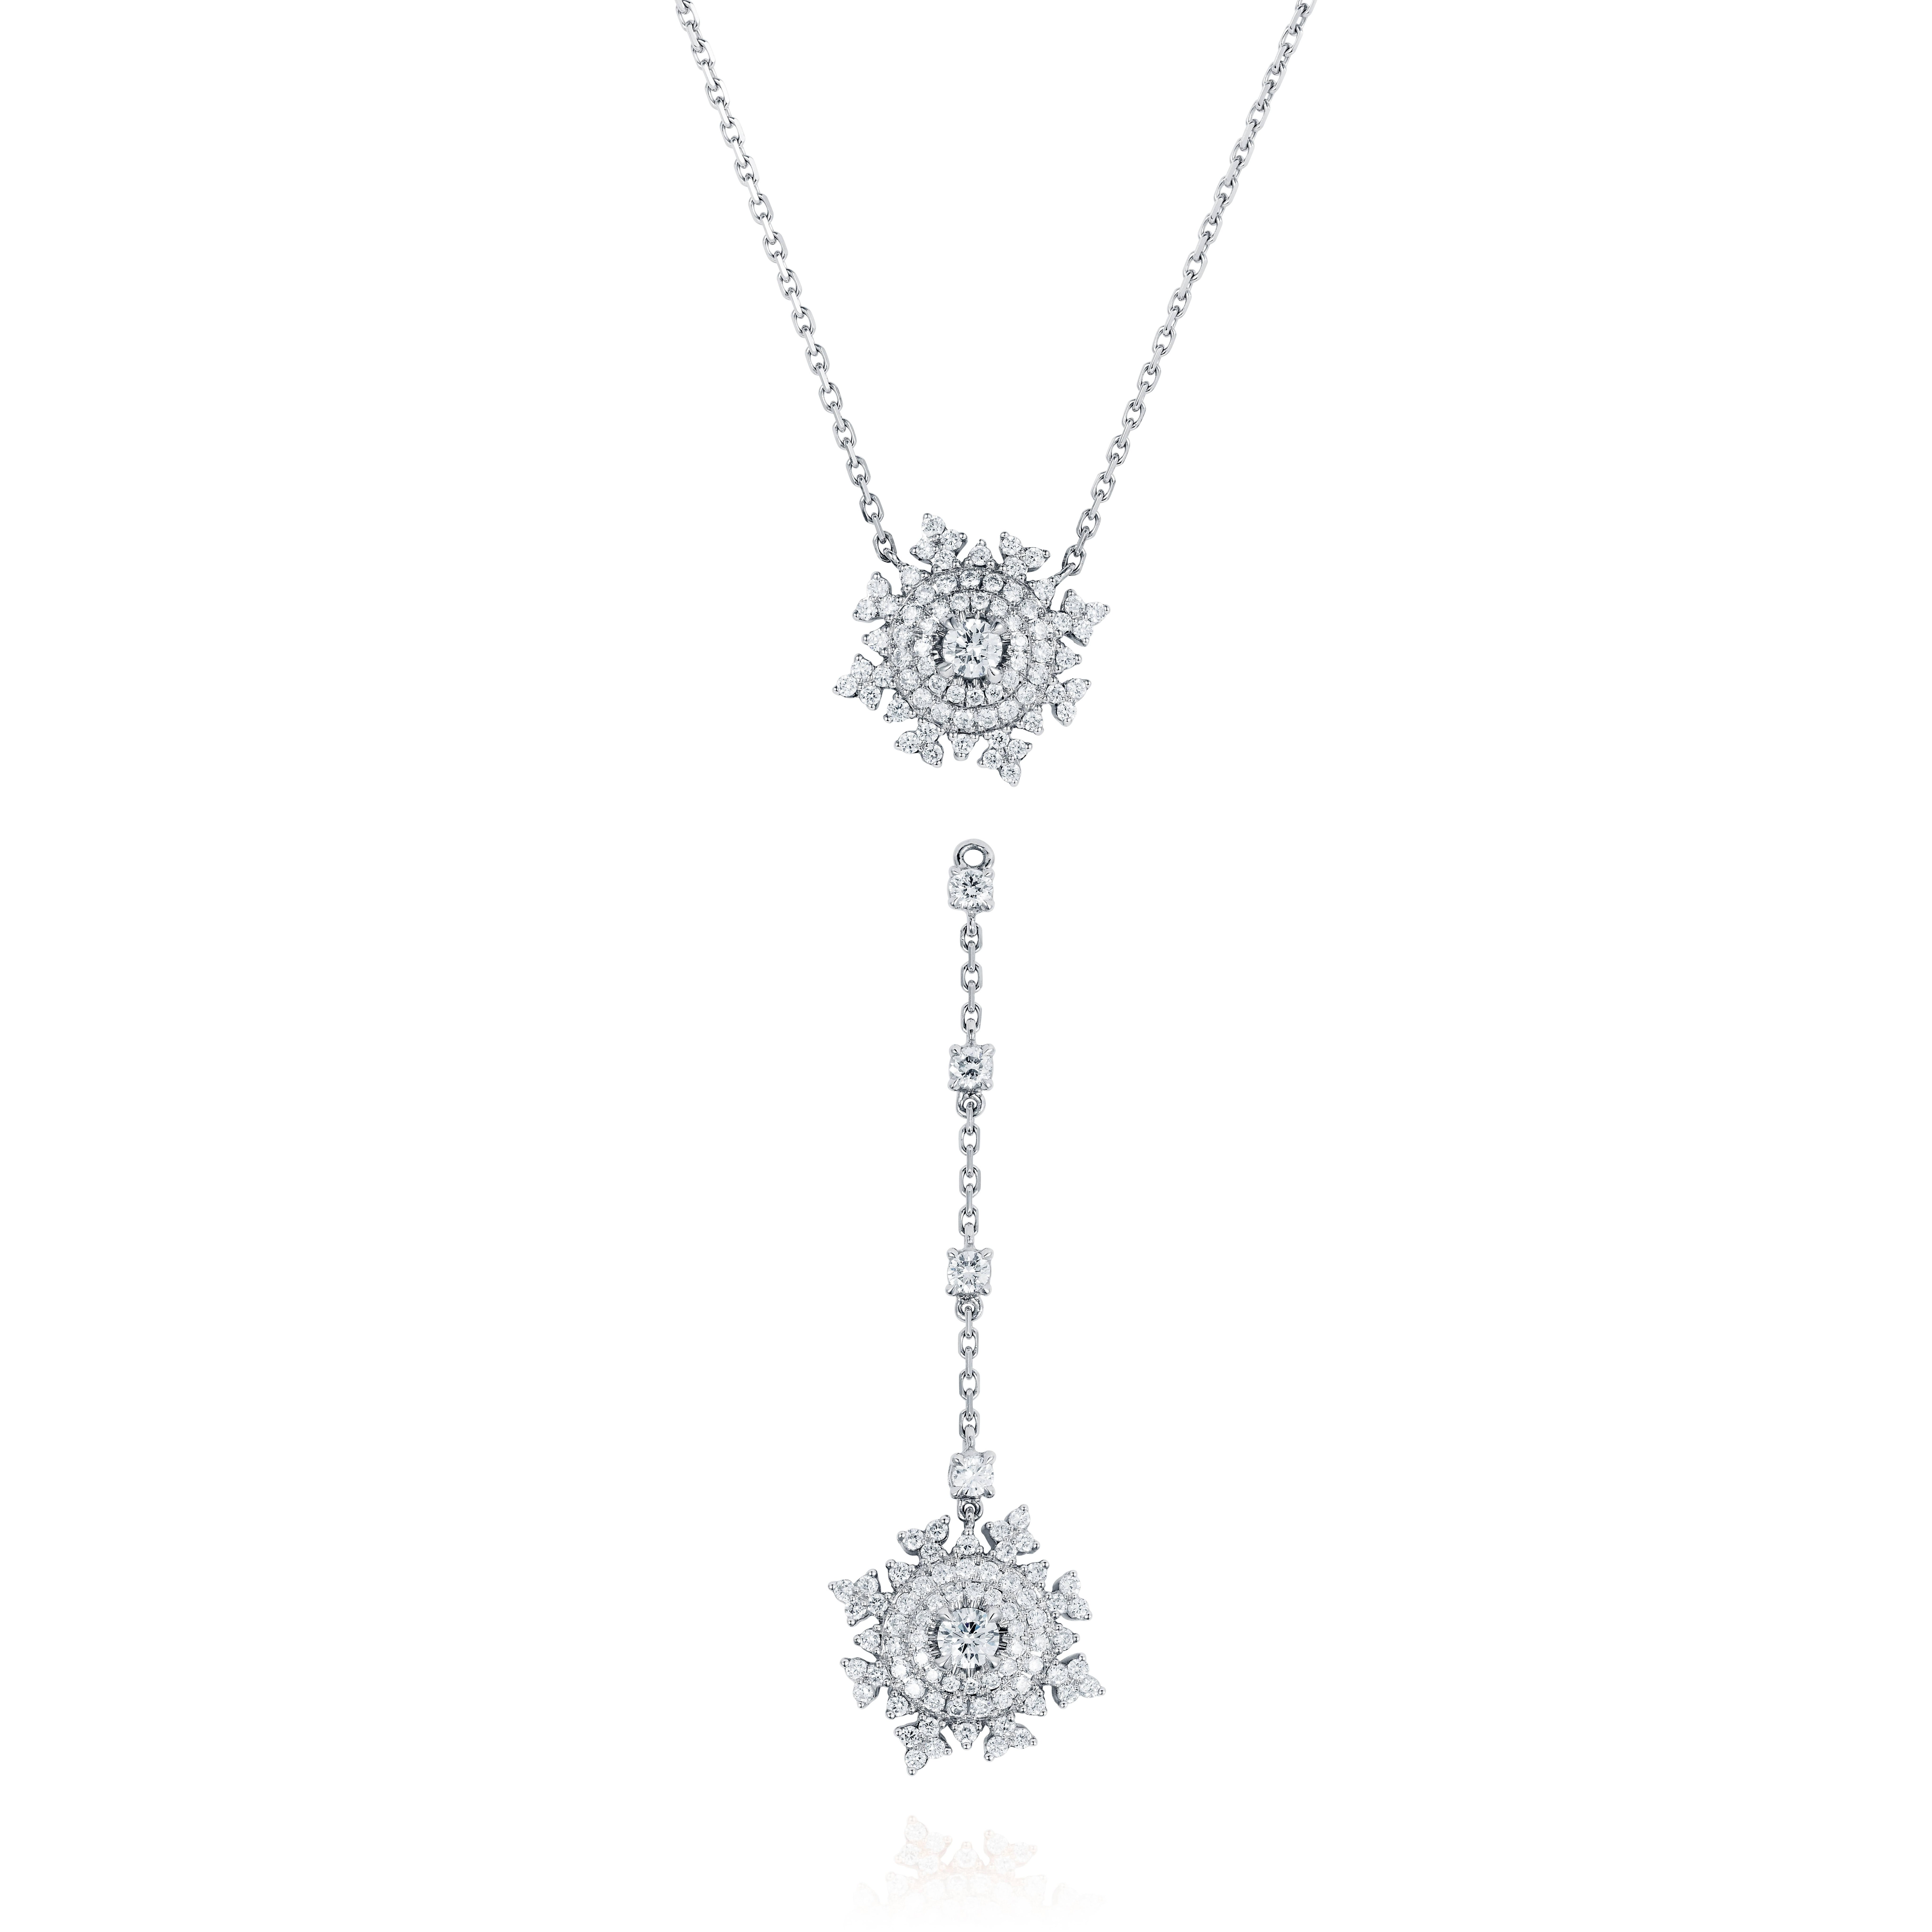 A stunning white gold and diamond necklace with detachable pendant. 150 white round-cut diamonds form intricate designs. By coming up with an original design for an engagement ring for her client, Nadine played with delicate diamonds, combining them